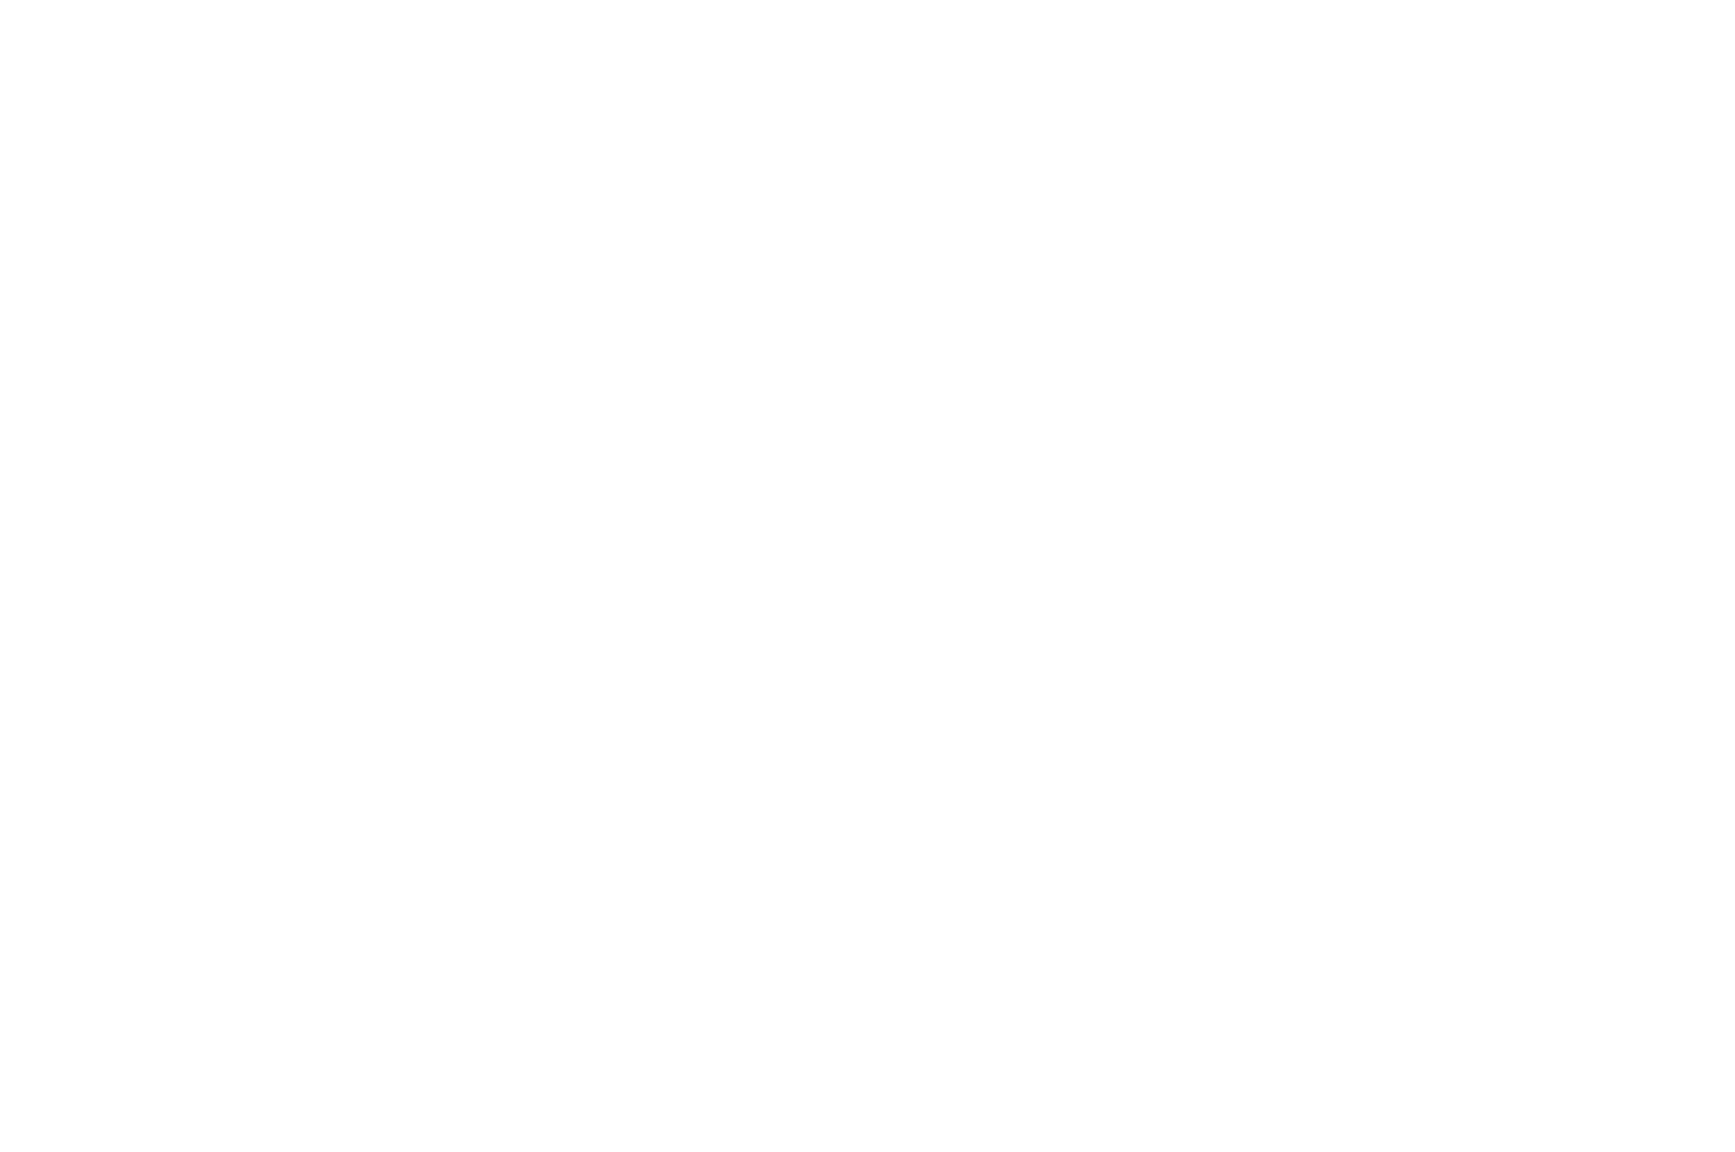 S.O.F.A Film Festival 2023 - Official Selection